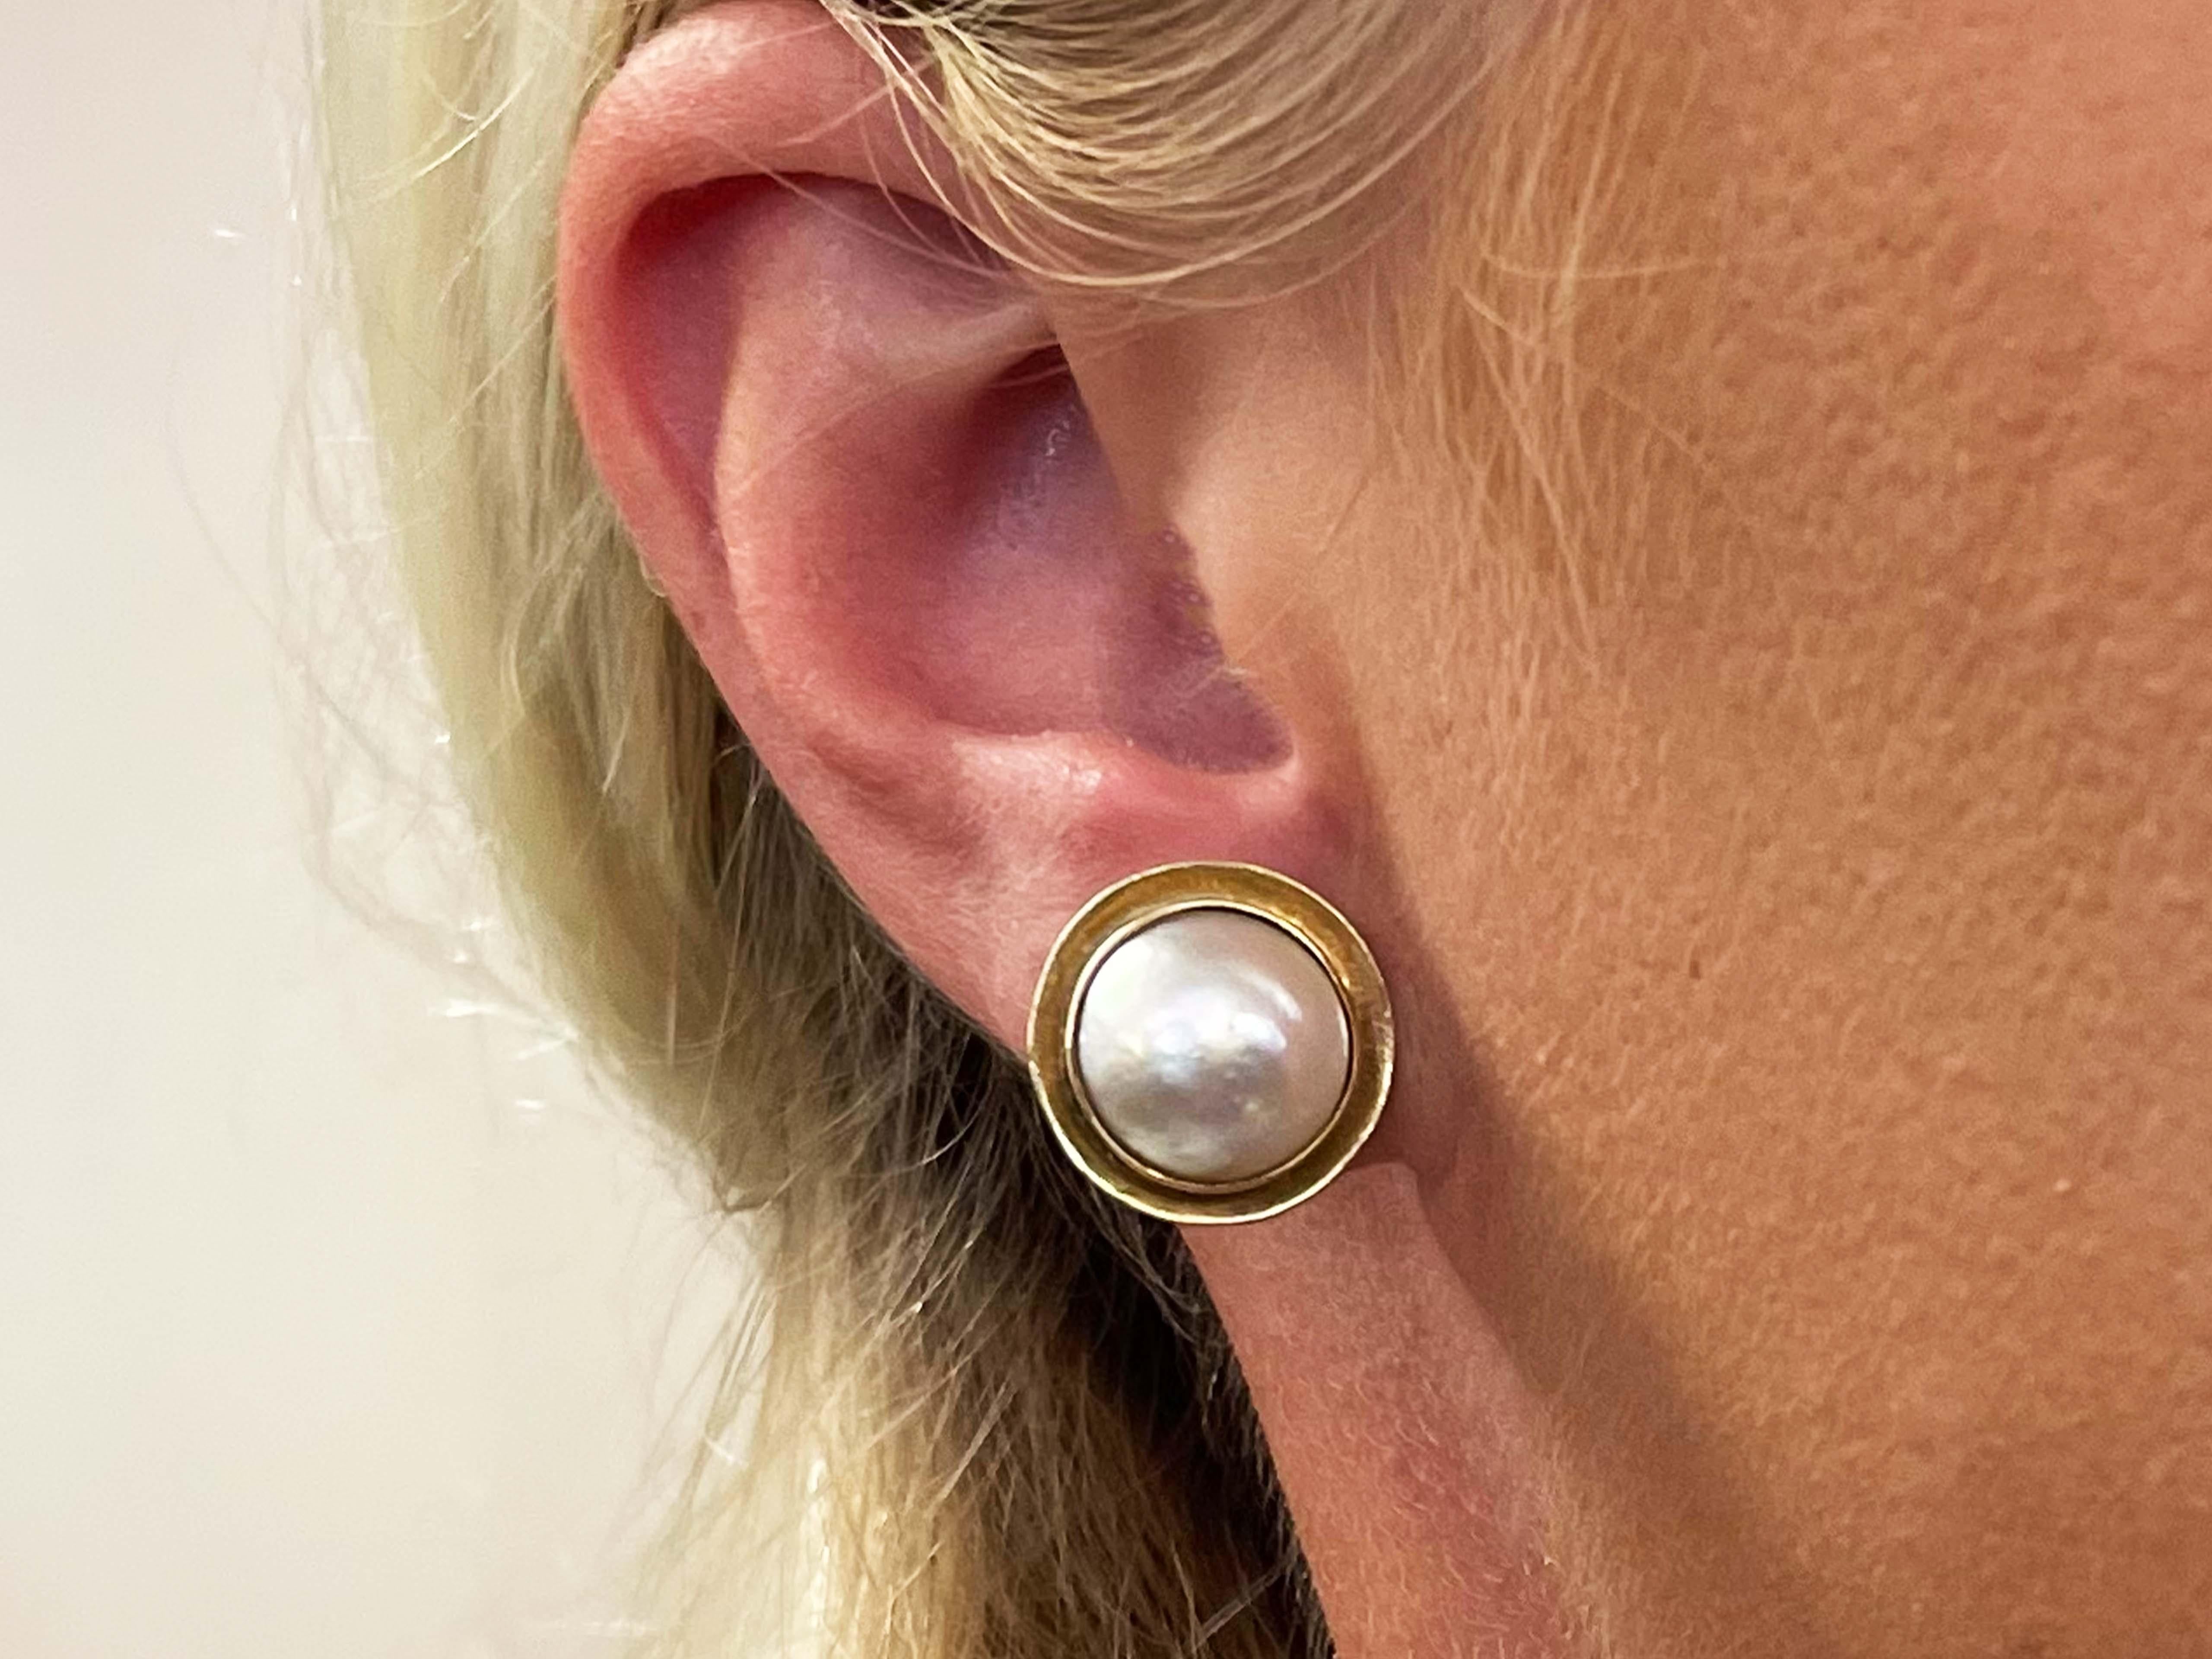 Earrings Specifications:

Designer: Ming's Hawaii

Metal: 14k Yellow Gold

Total Weight: 6.6 Grams

Pearl: Mabe

Pearl Diameter: 12.20 mm

Earring Diameter: 15.90 mm

Stamped: 